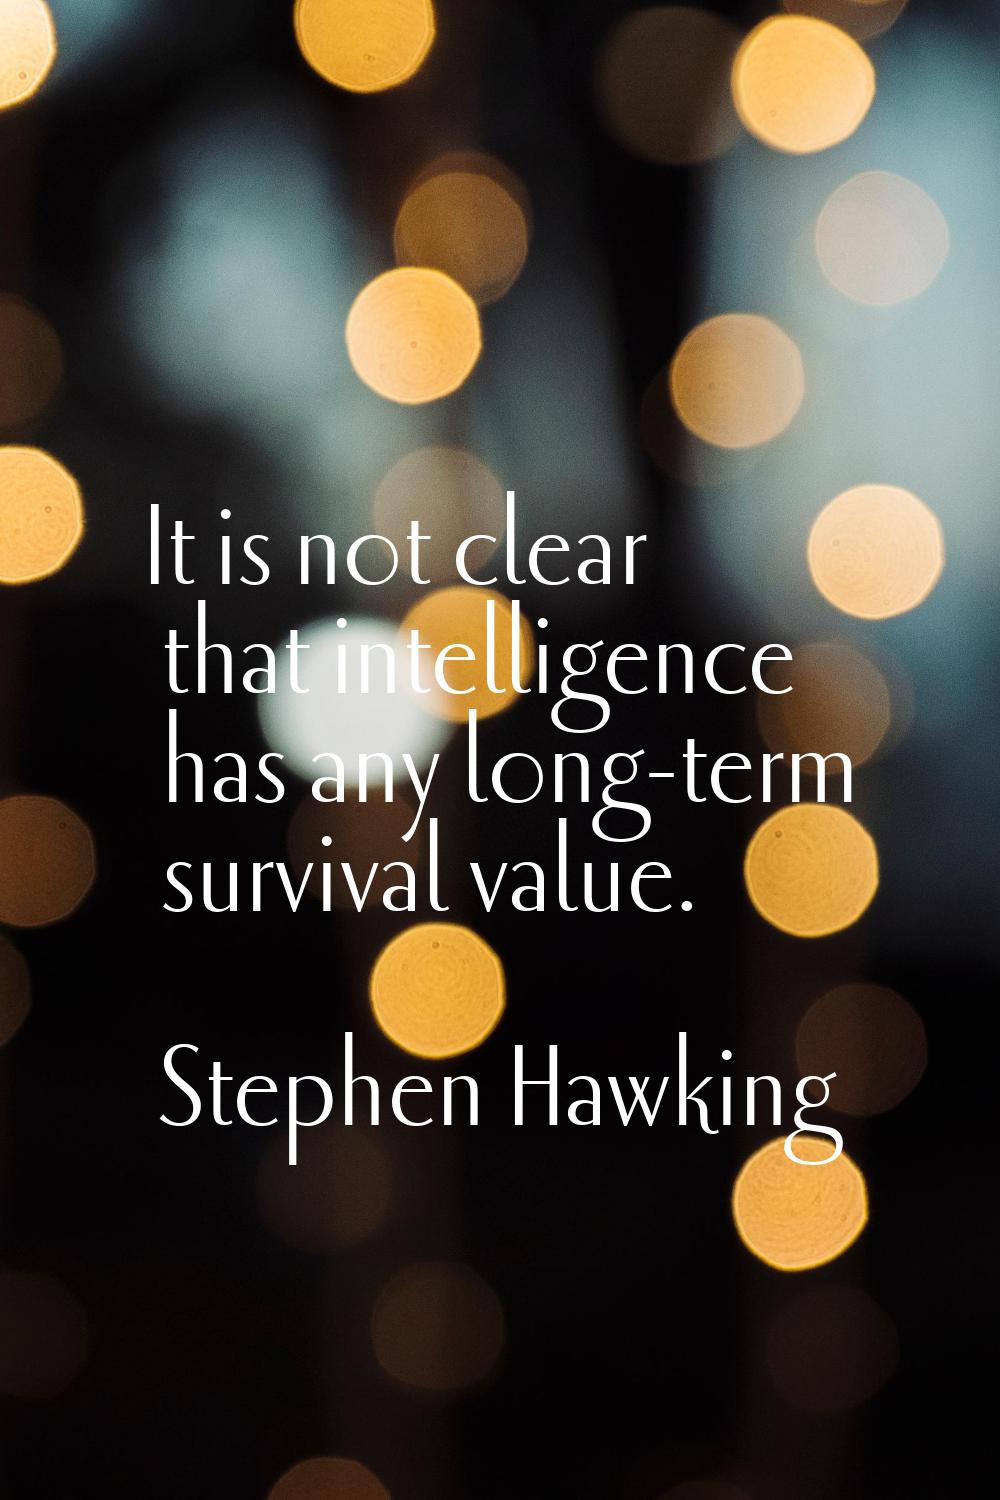 It is not clear that intelligence has any long-term survival value.